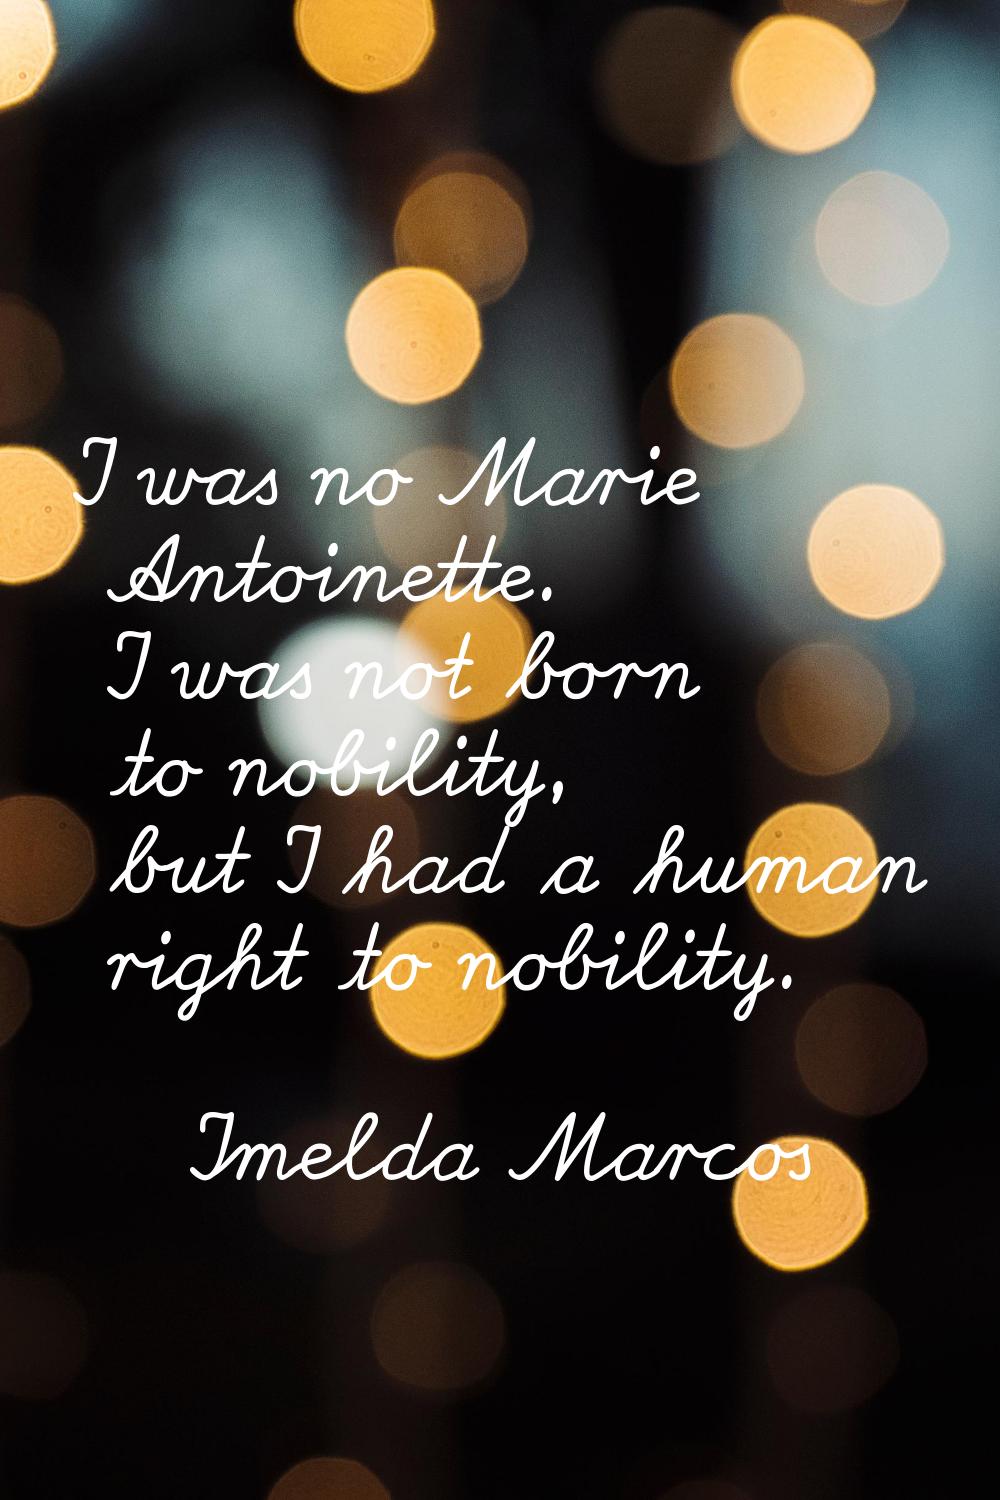 I was no Marie Antoinette. I was not born to nobility, but I had a human right to nobility.